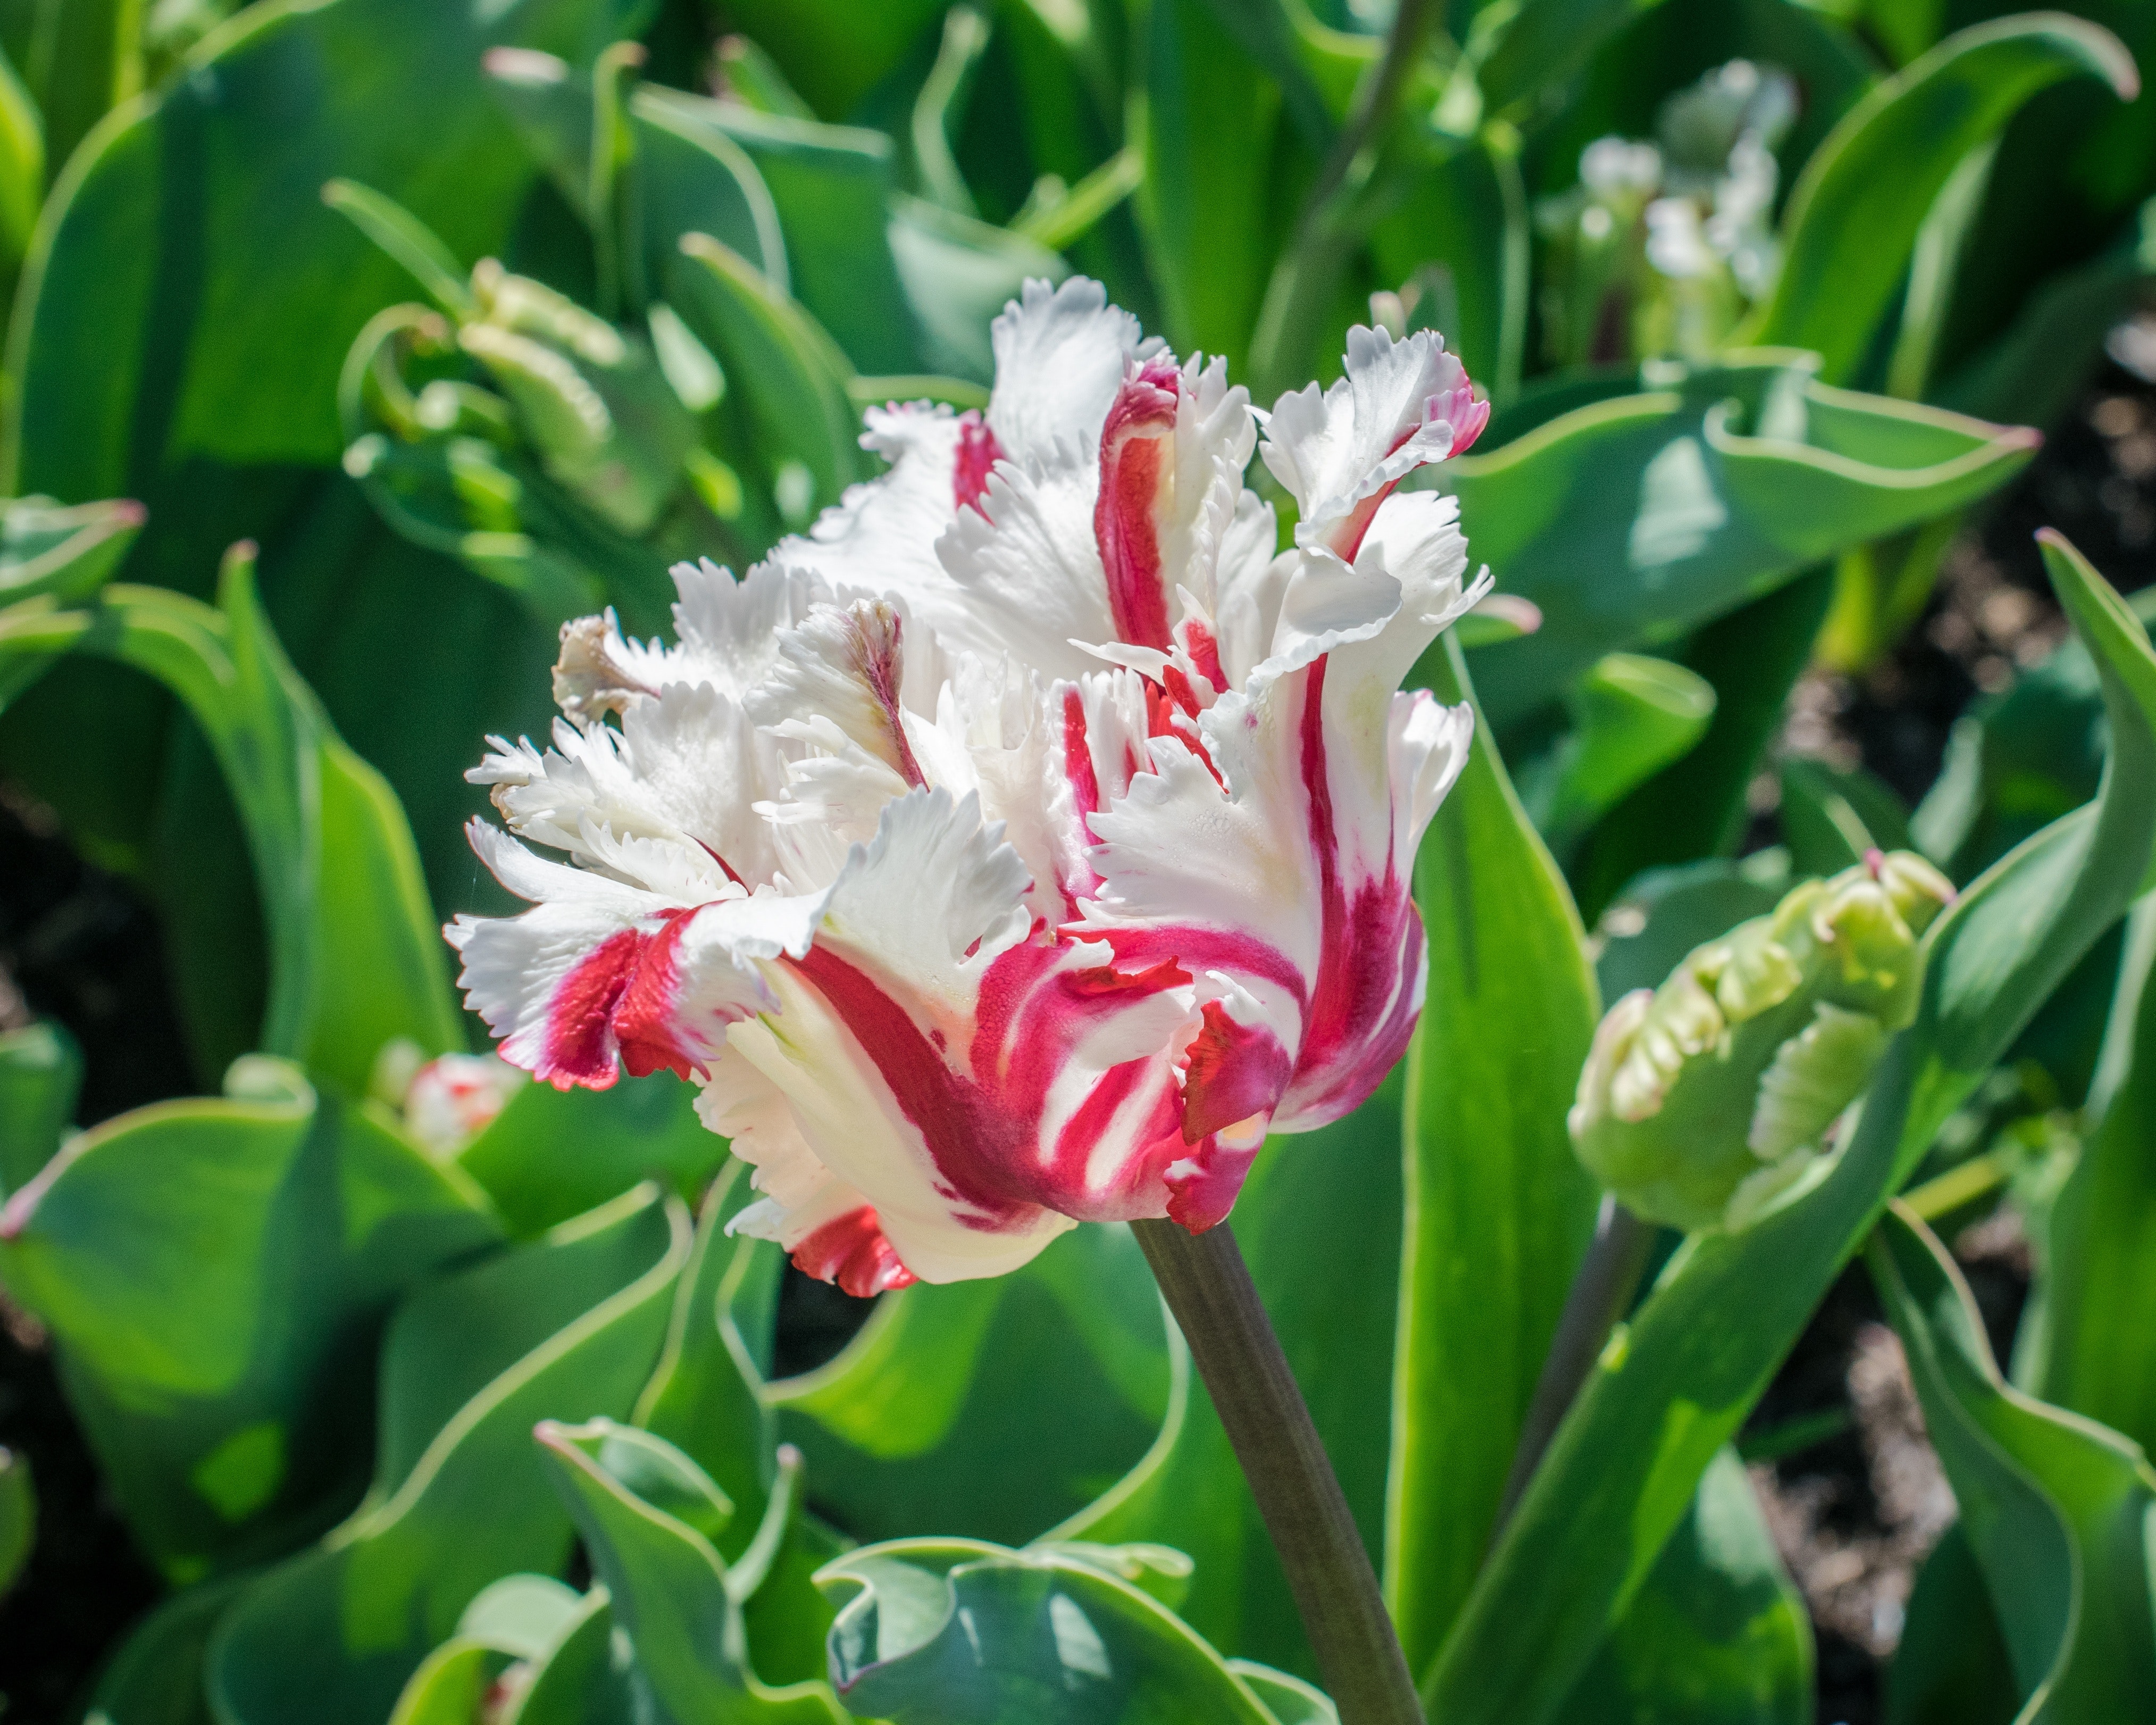 White and Red Flower during Day Time, Focus, Vibrant, Unique, Tulip, HQ Photo